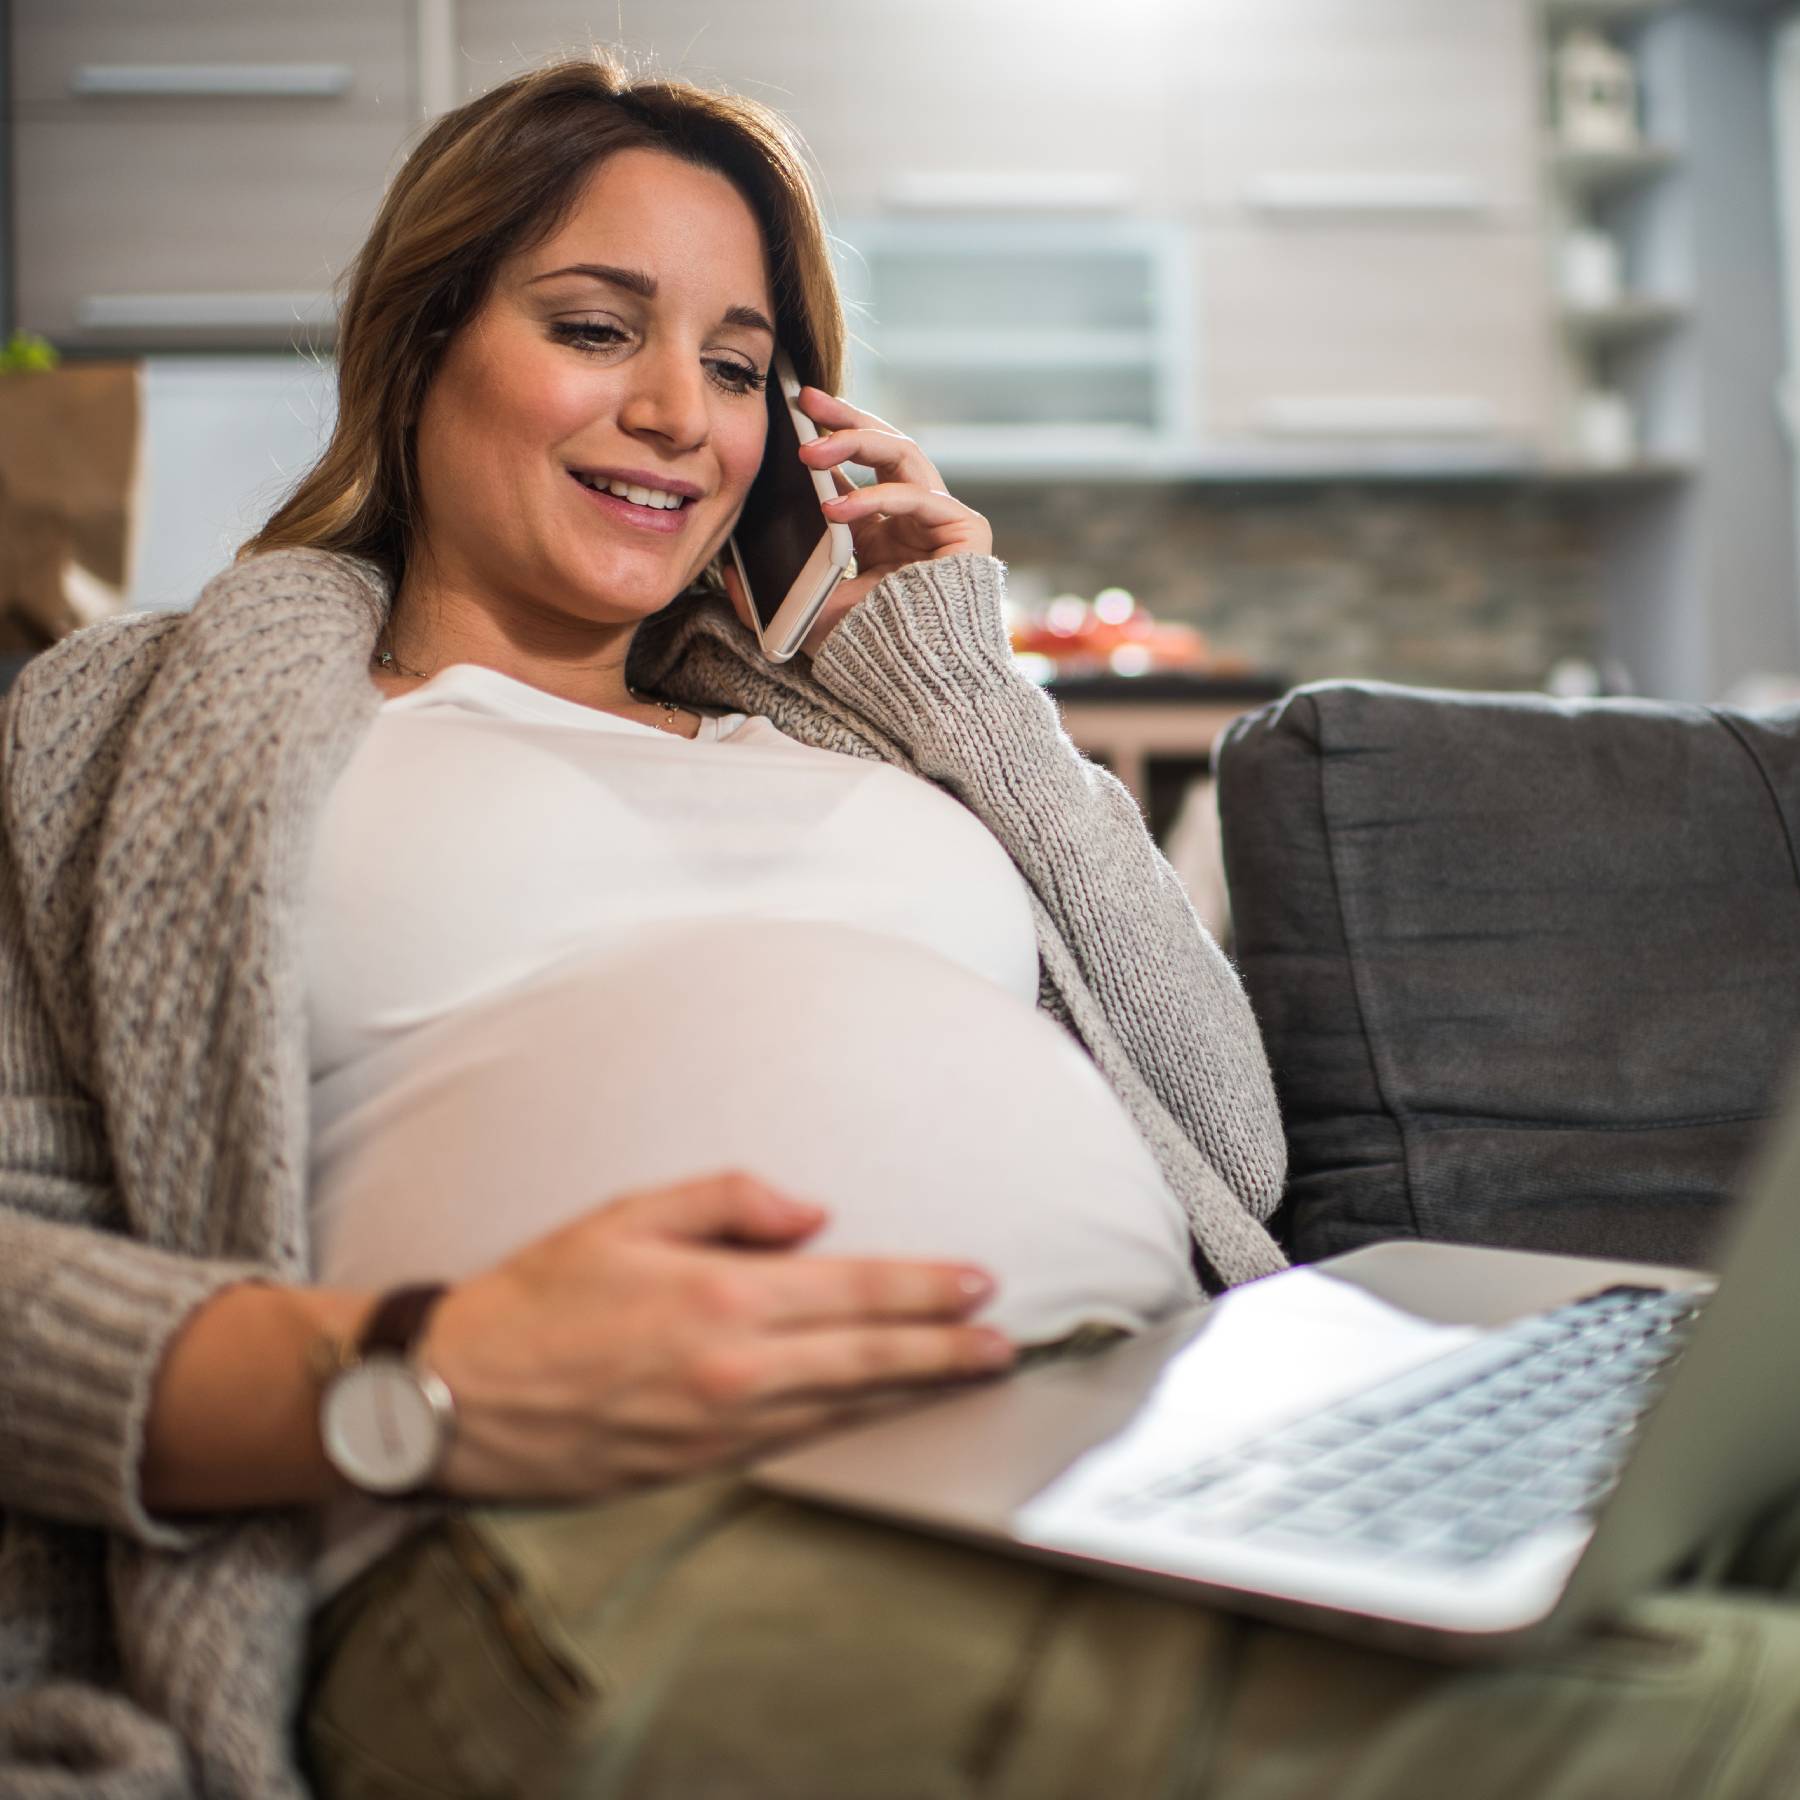 Pregnant female looking at laptop and talking on cell phone